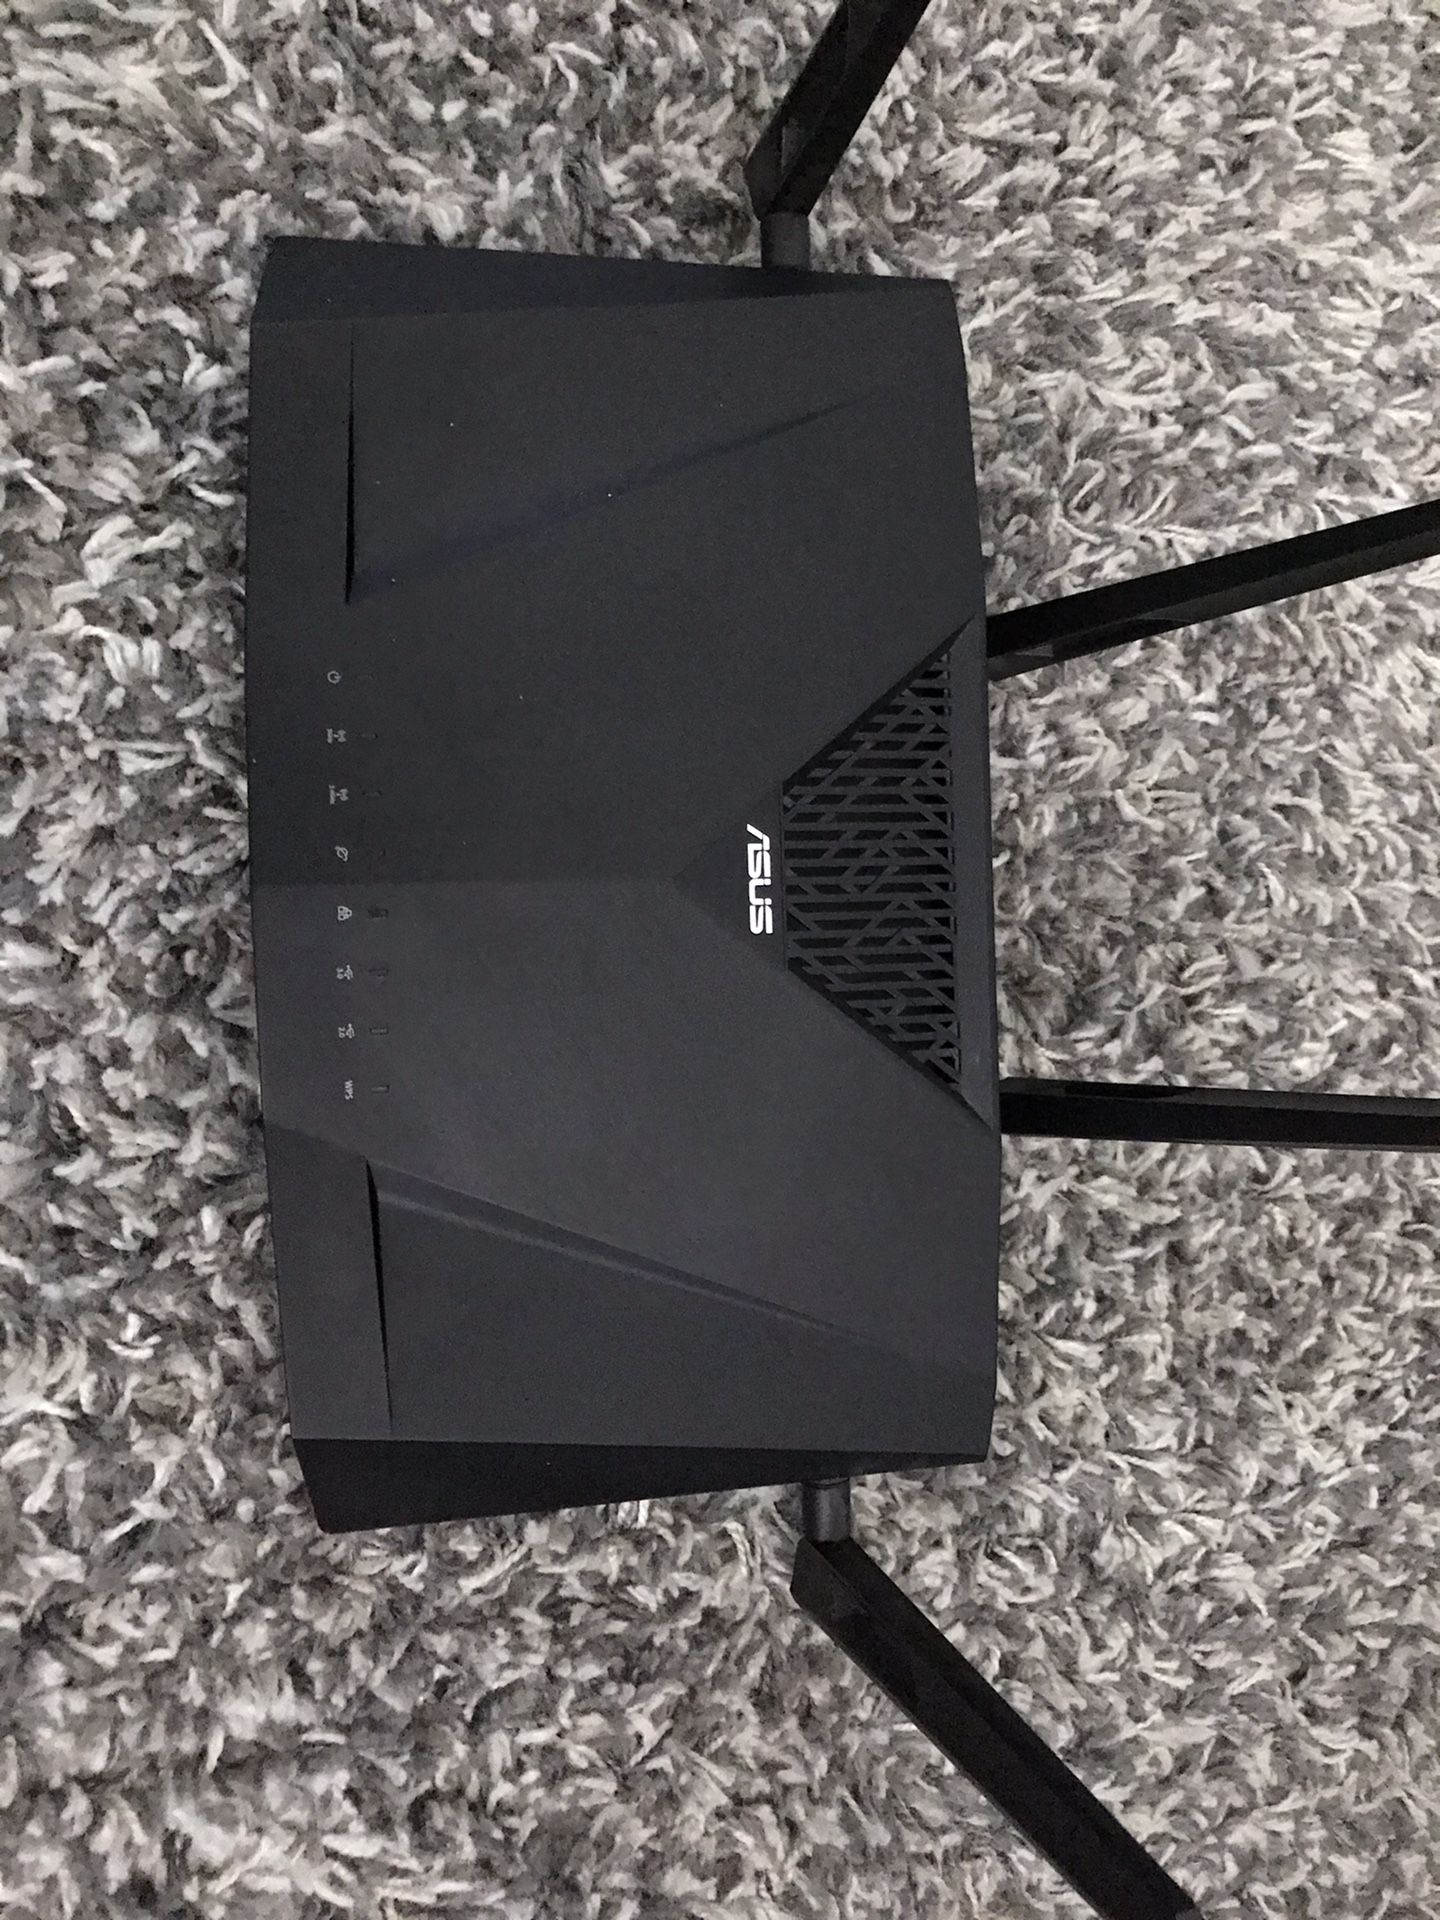 ASUS AC 3100 dual band router